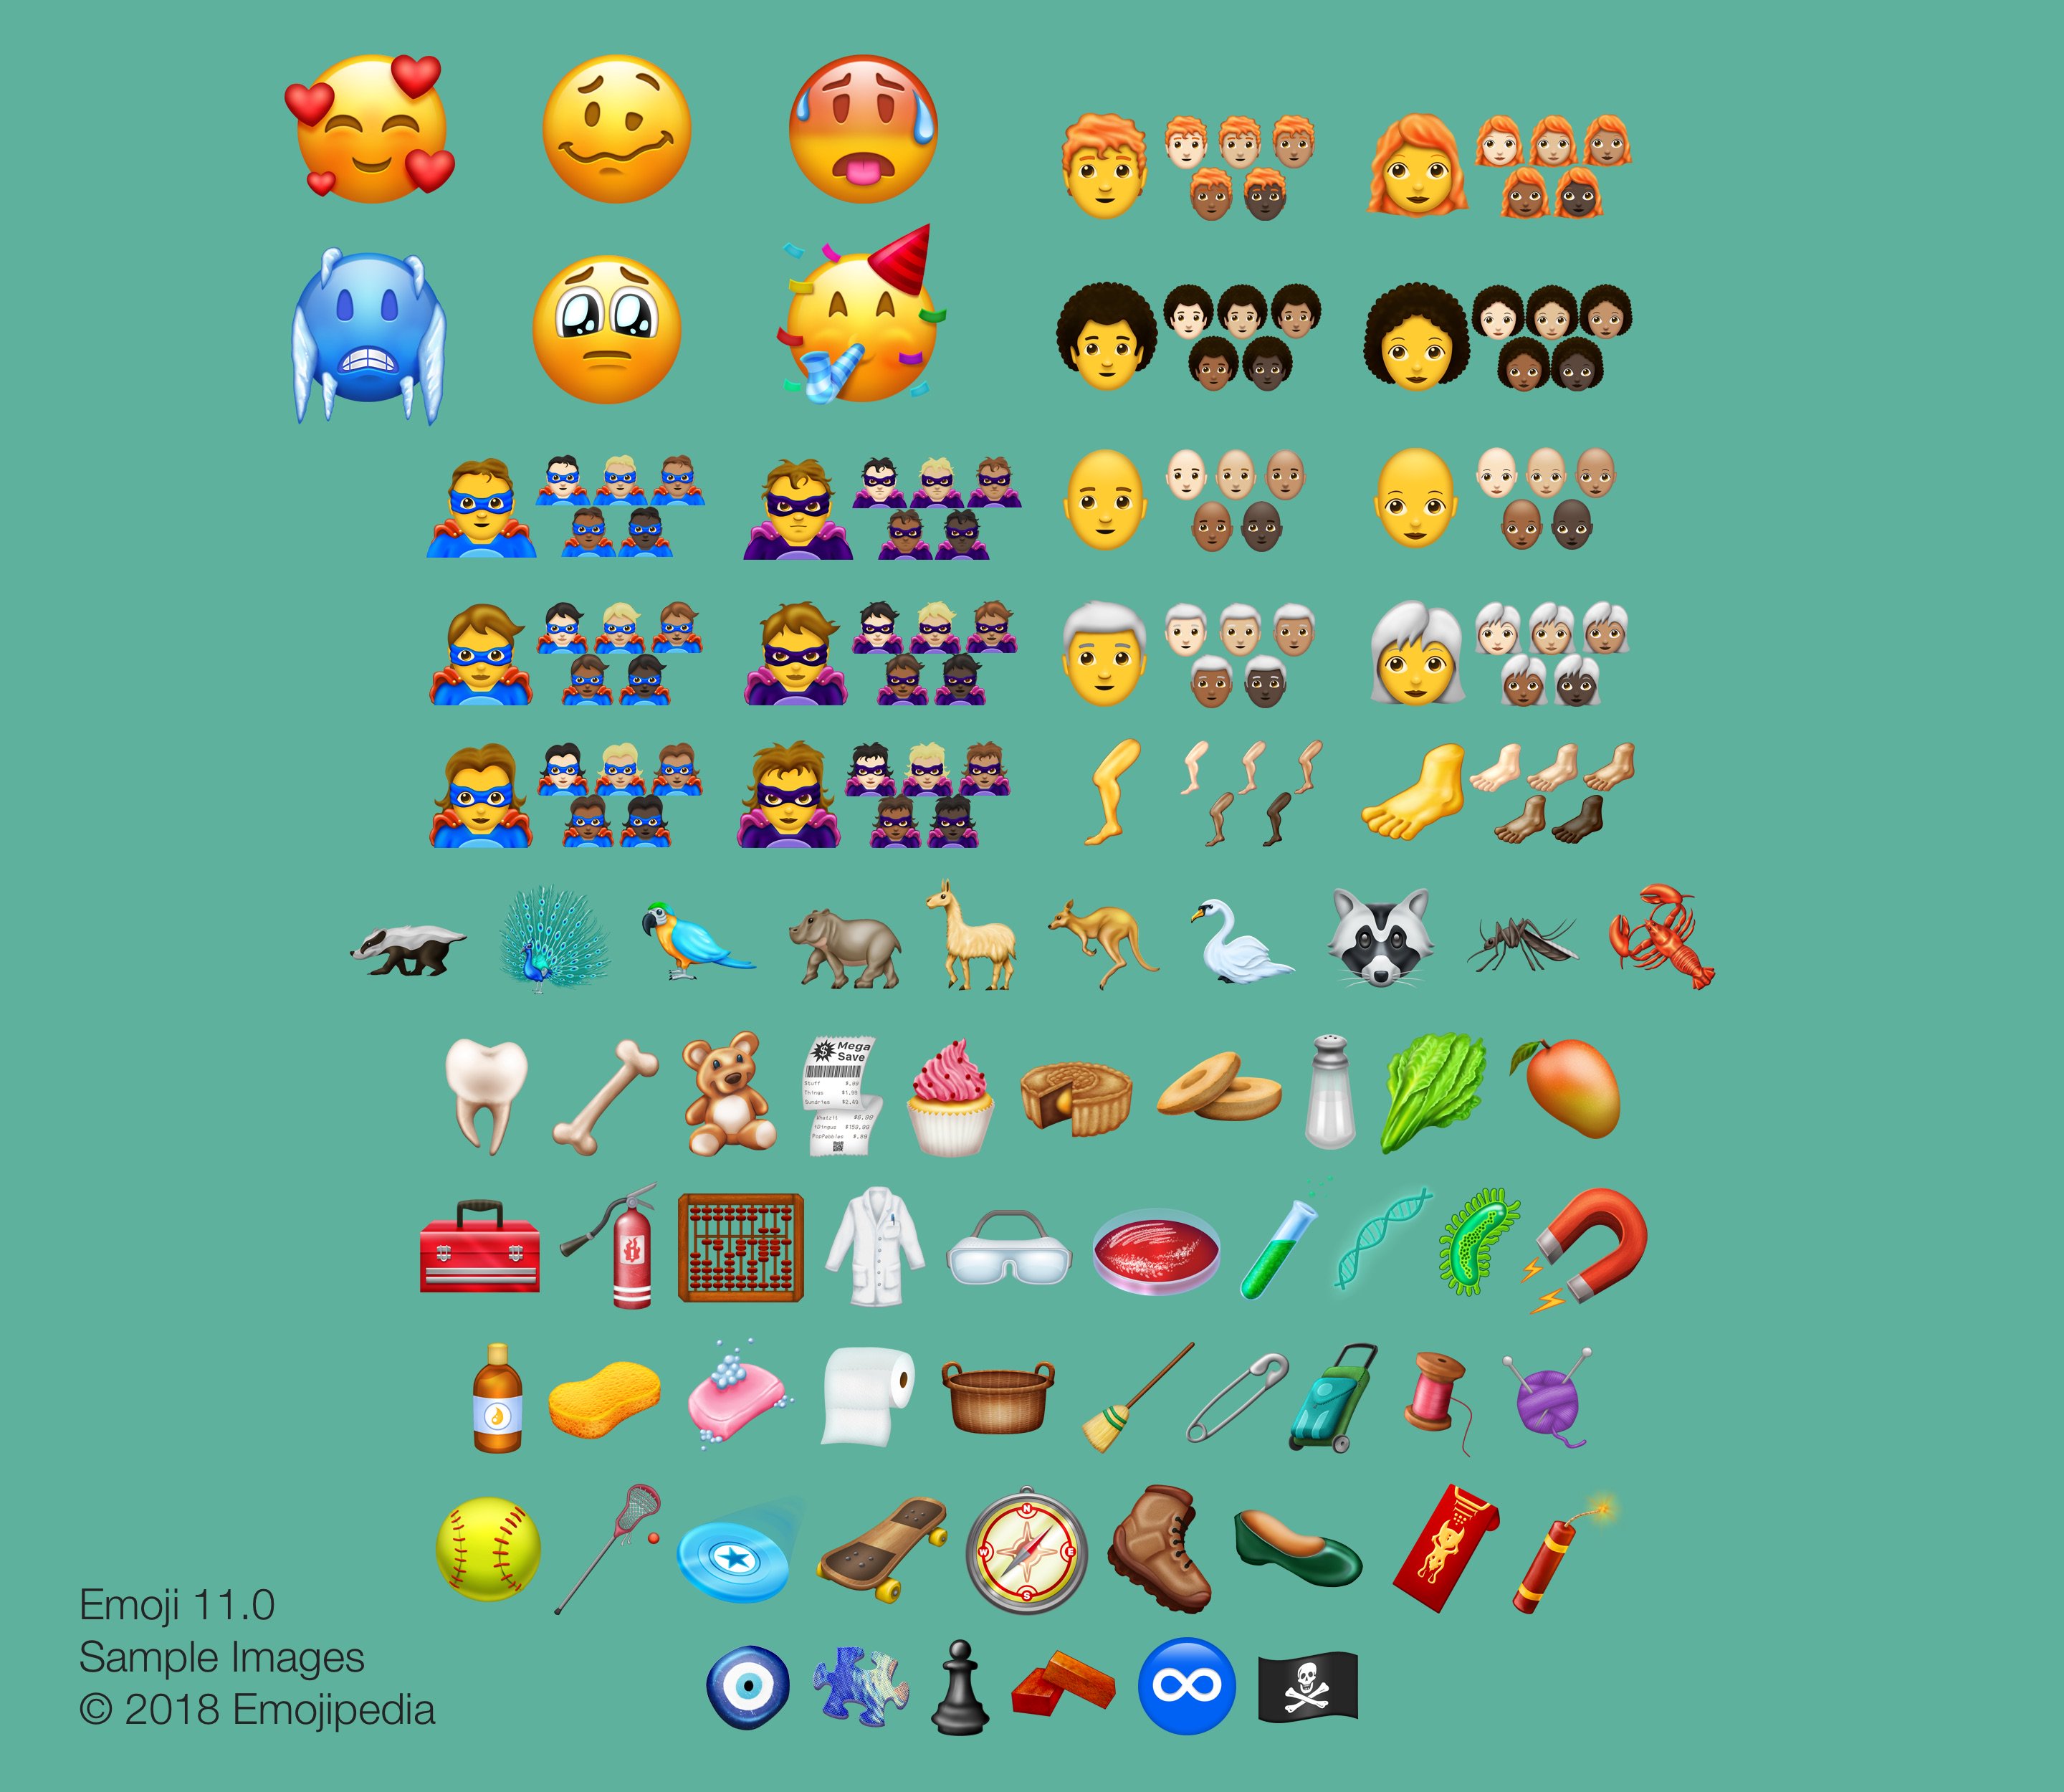 Superheroes and Villains Are on Their Way to iOS via 157 New Emoji in Unicode 11